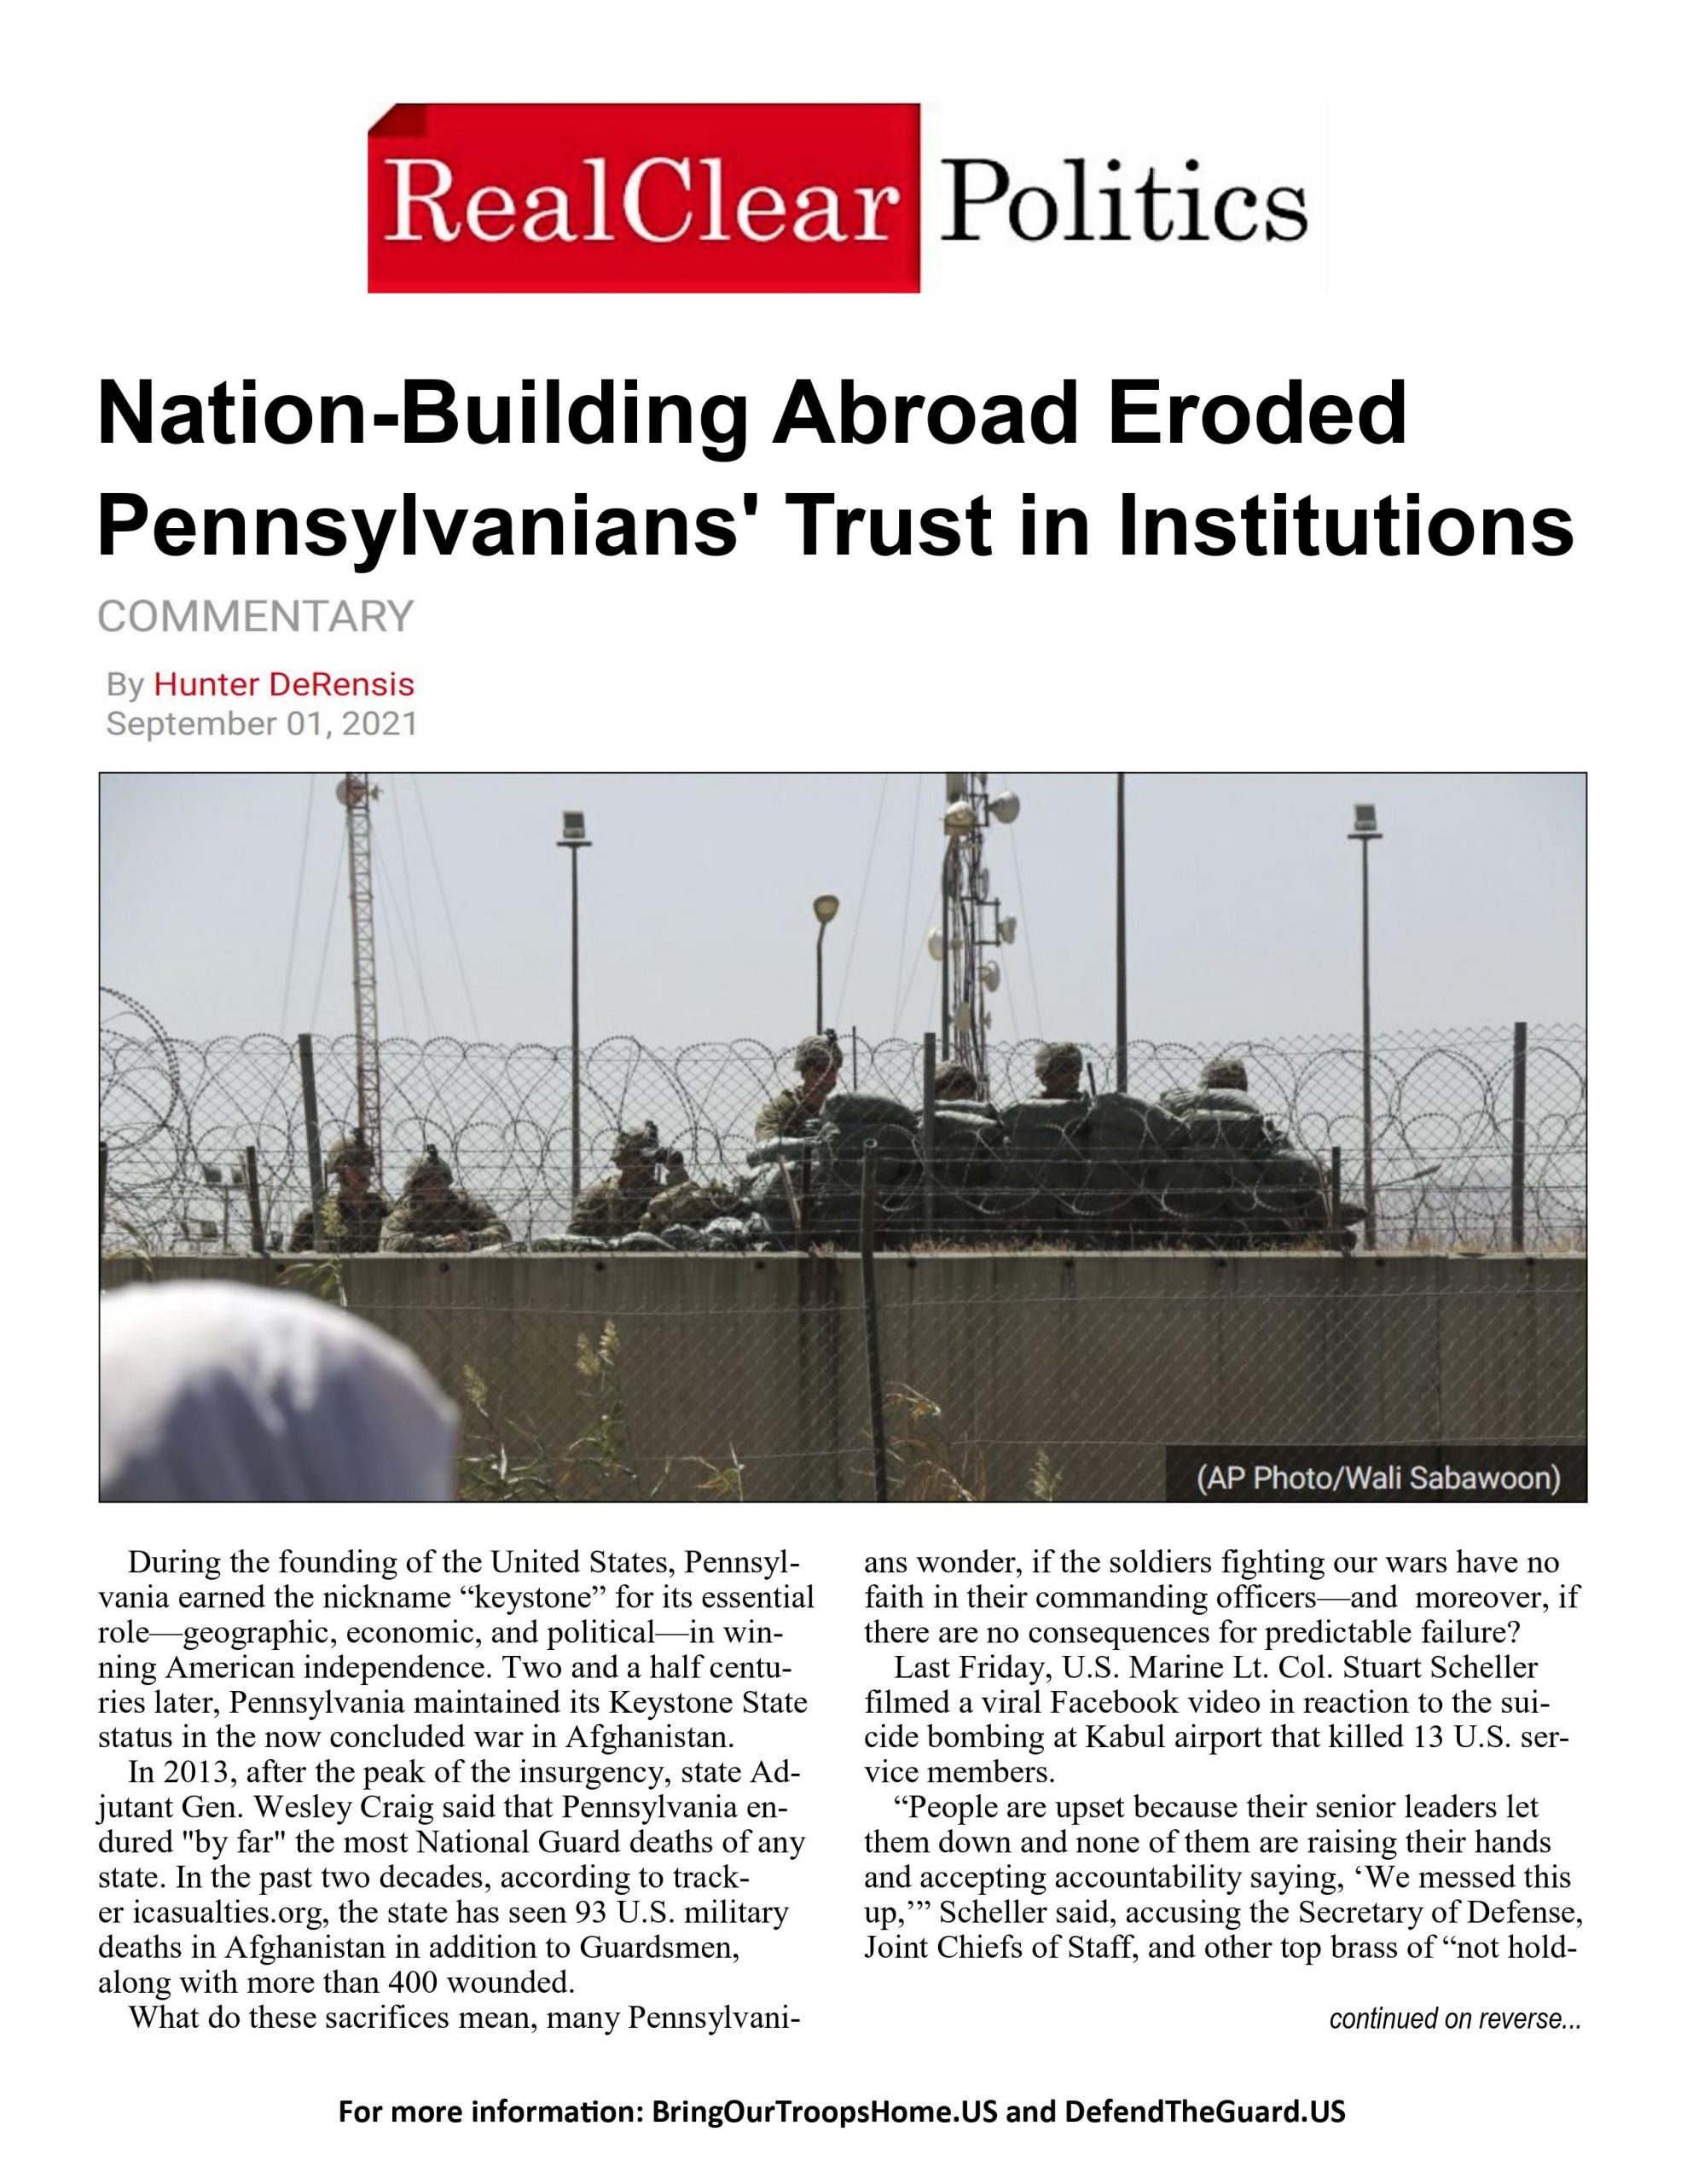 Nation-Building Abroad Eroded Pennsylvanians’ Trust in Institutions